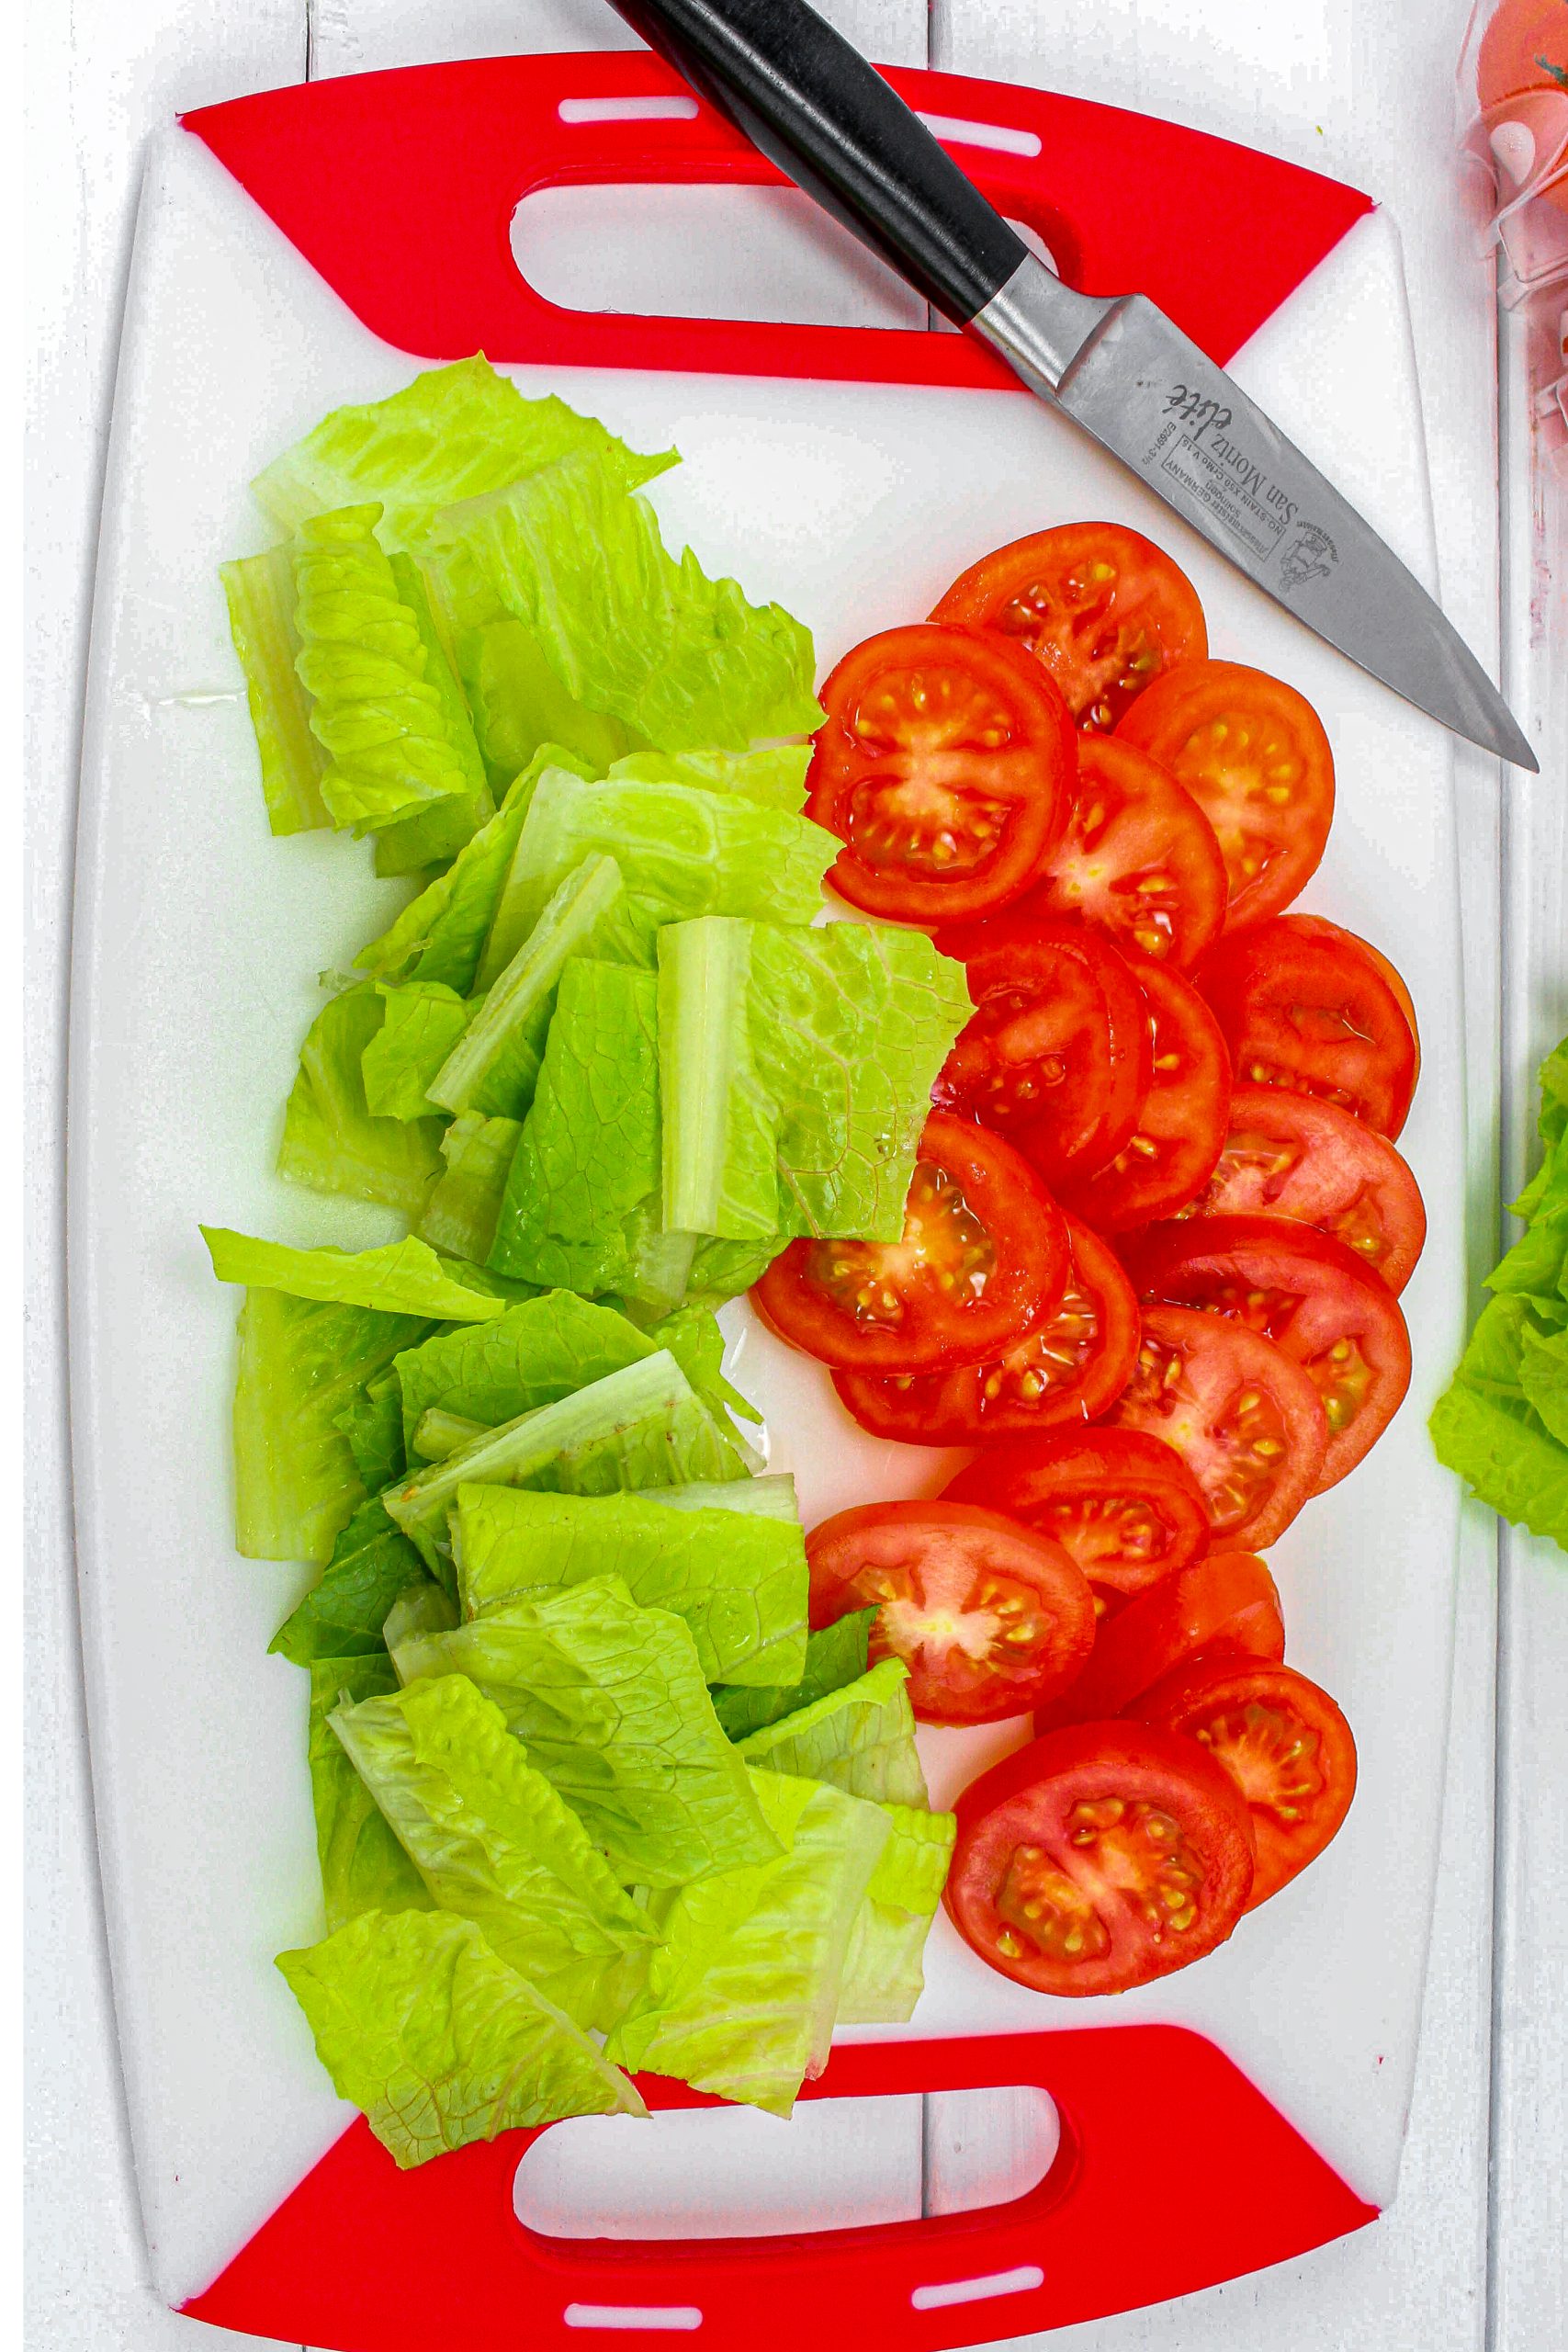 Cut the tomatoes into 4 slices and cut the lettuce into small pieces.